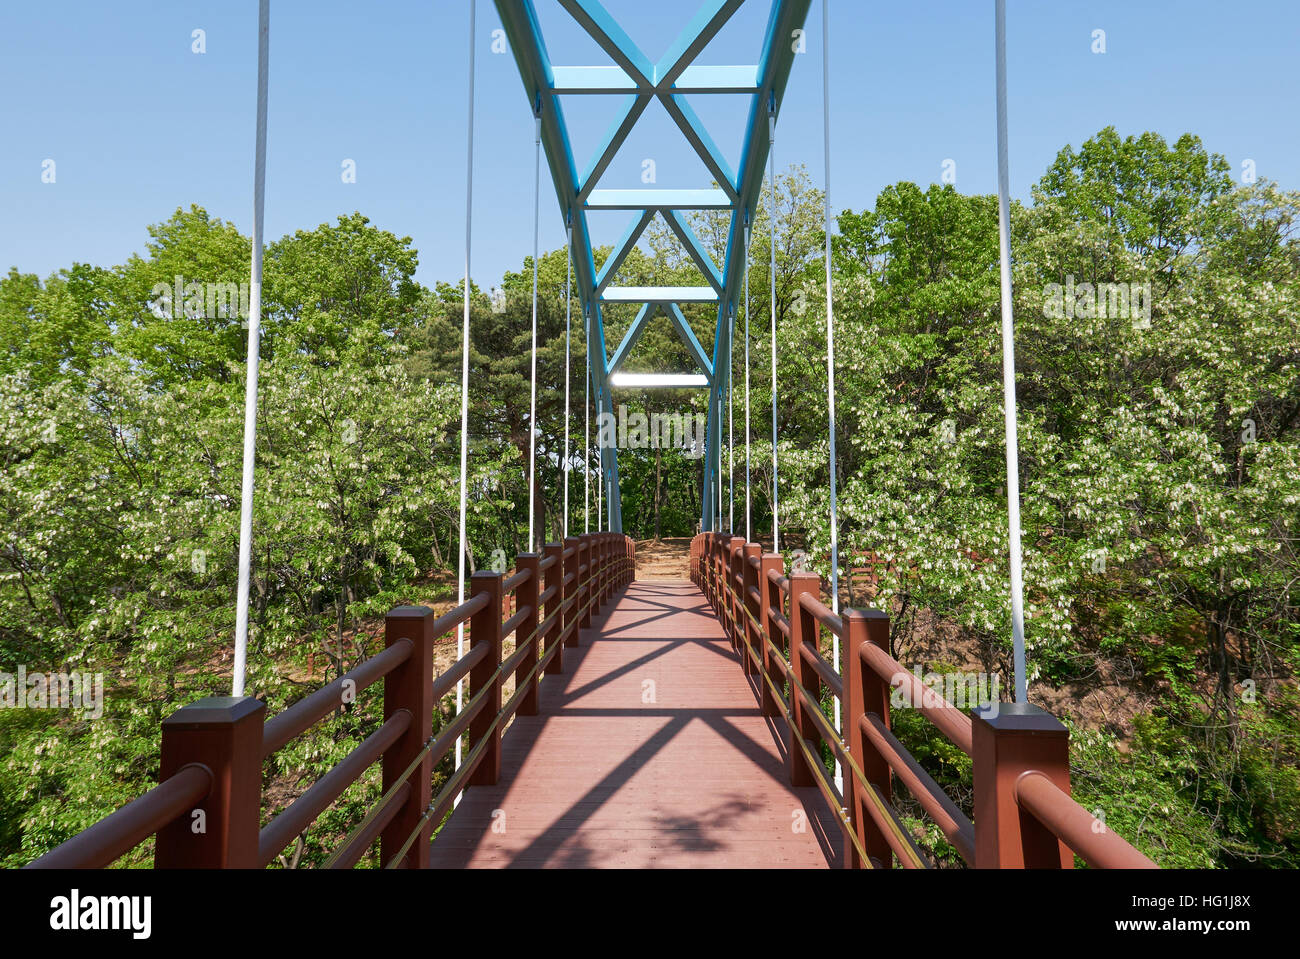 Small Pedestrian Bridge in the form of a cable-stayed bridge in a park Stock Photo